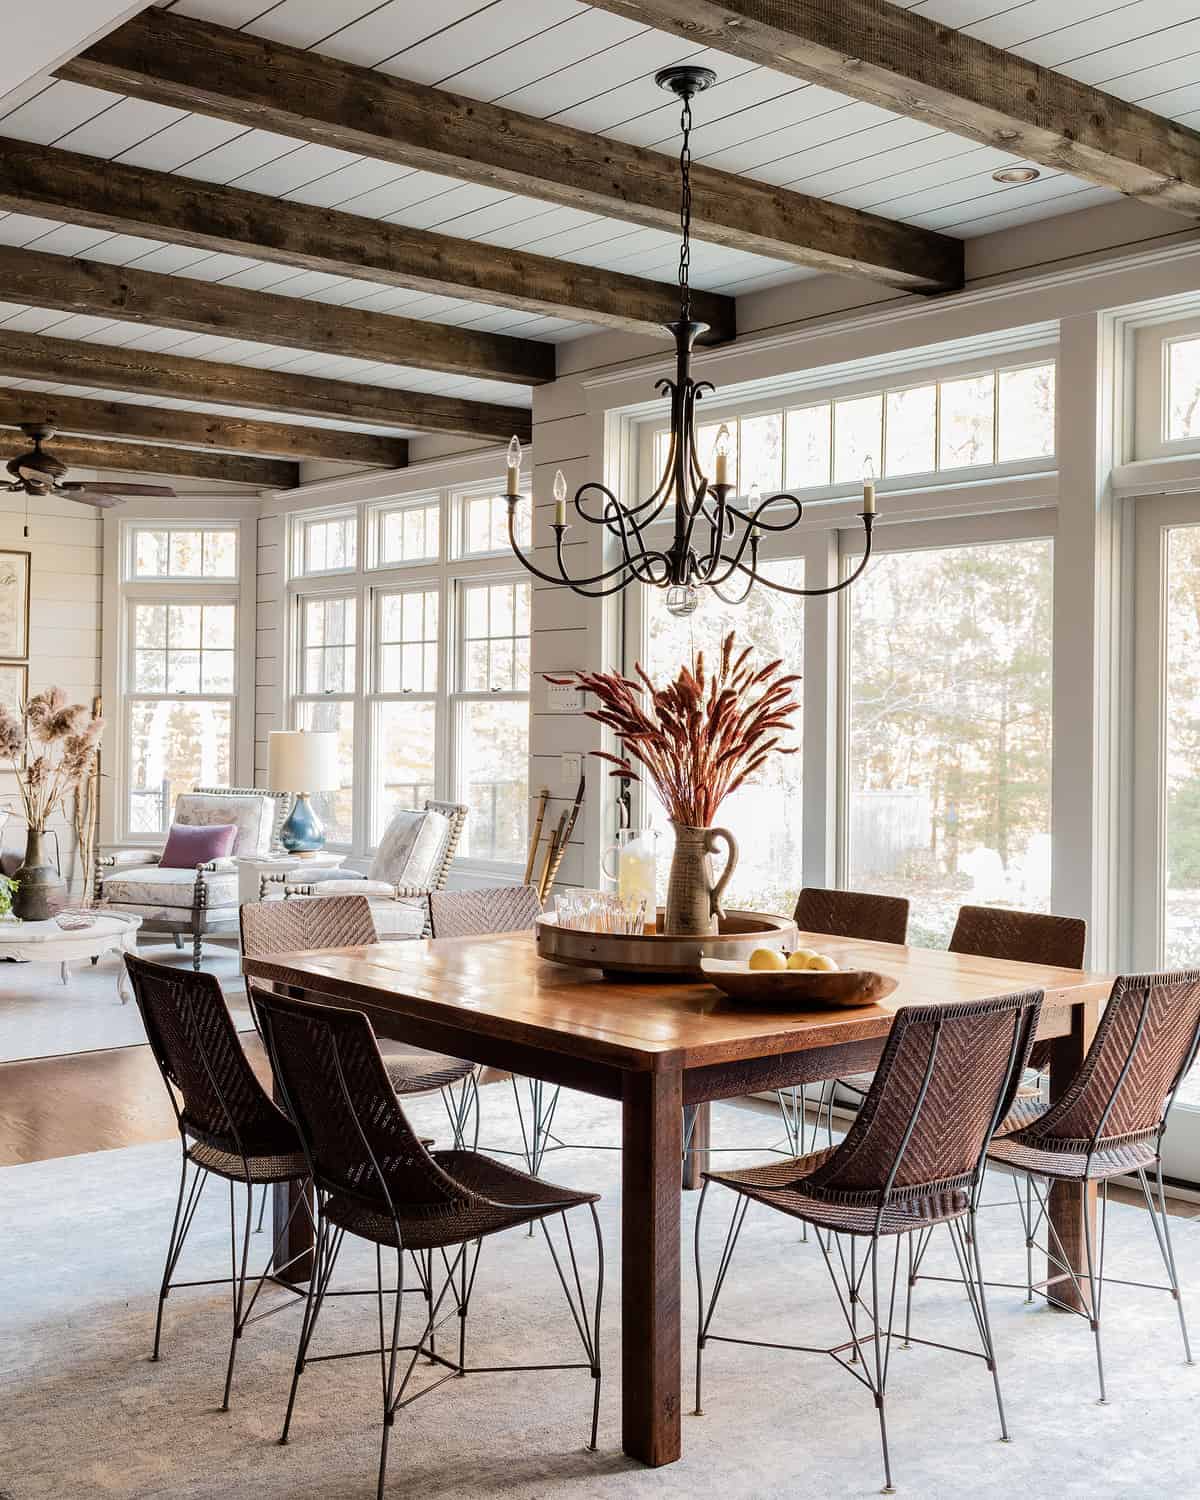 AFTER Breakfast Area- A wall was removed to connect breakfast to sunroom, two sets of French glass sliding doors now lead to pool. New space features floor to ceiling shiplap paneling and rustic wood beams.